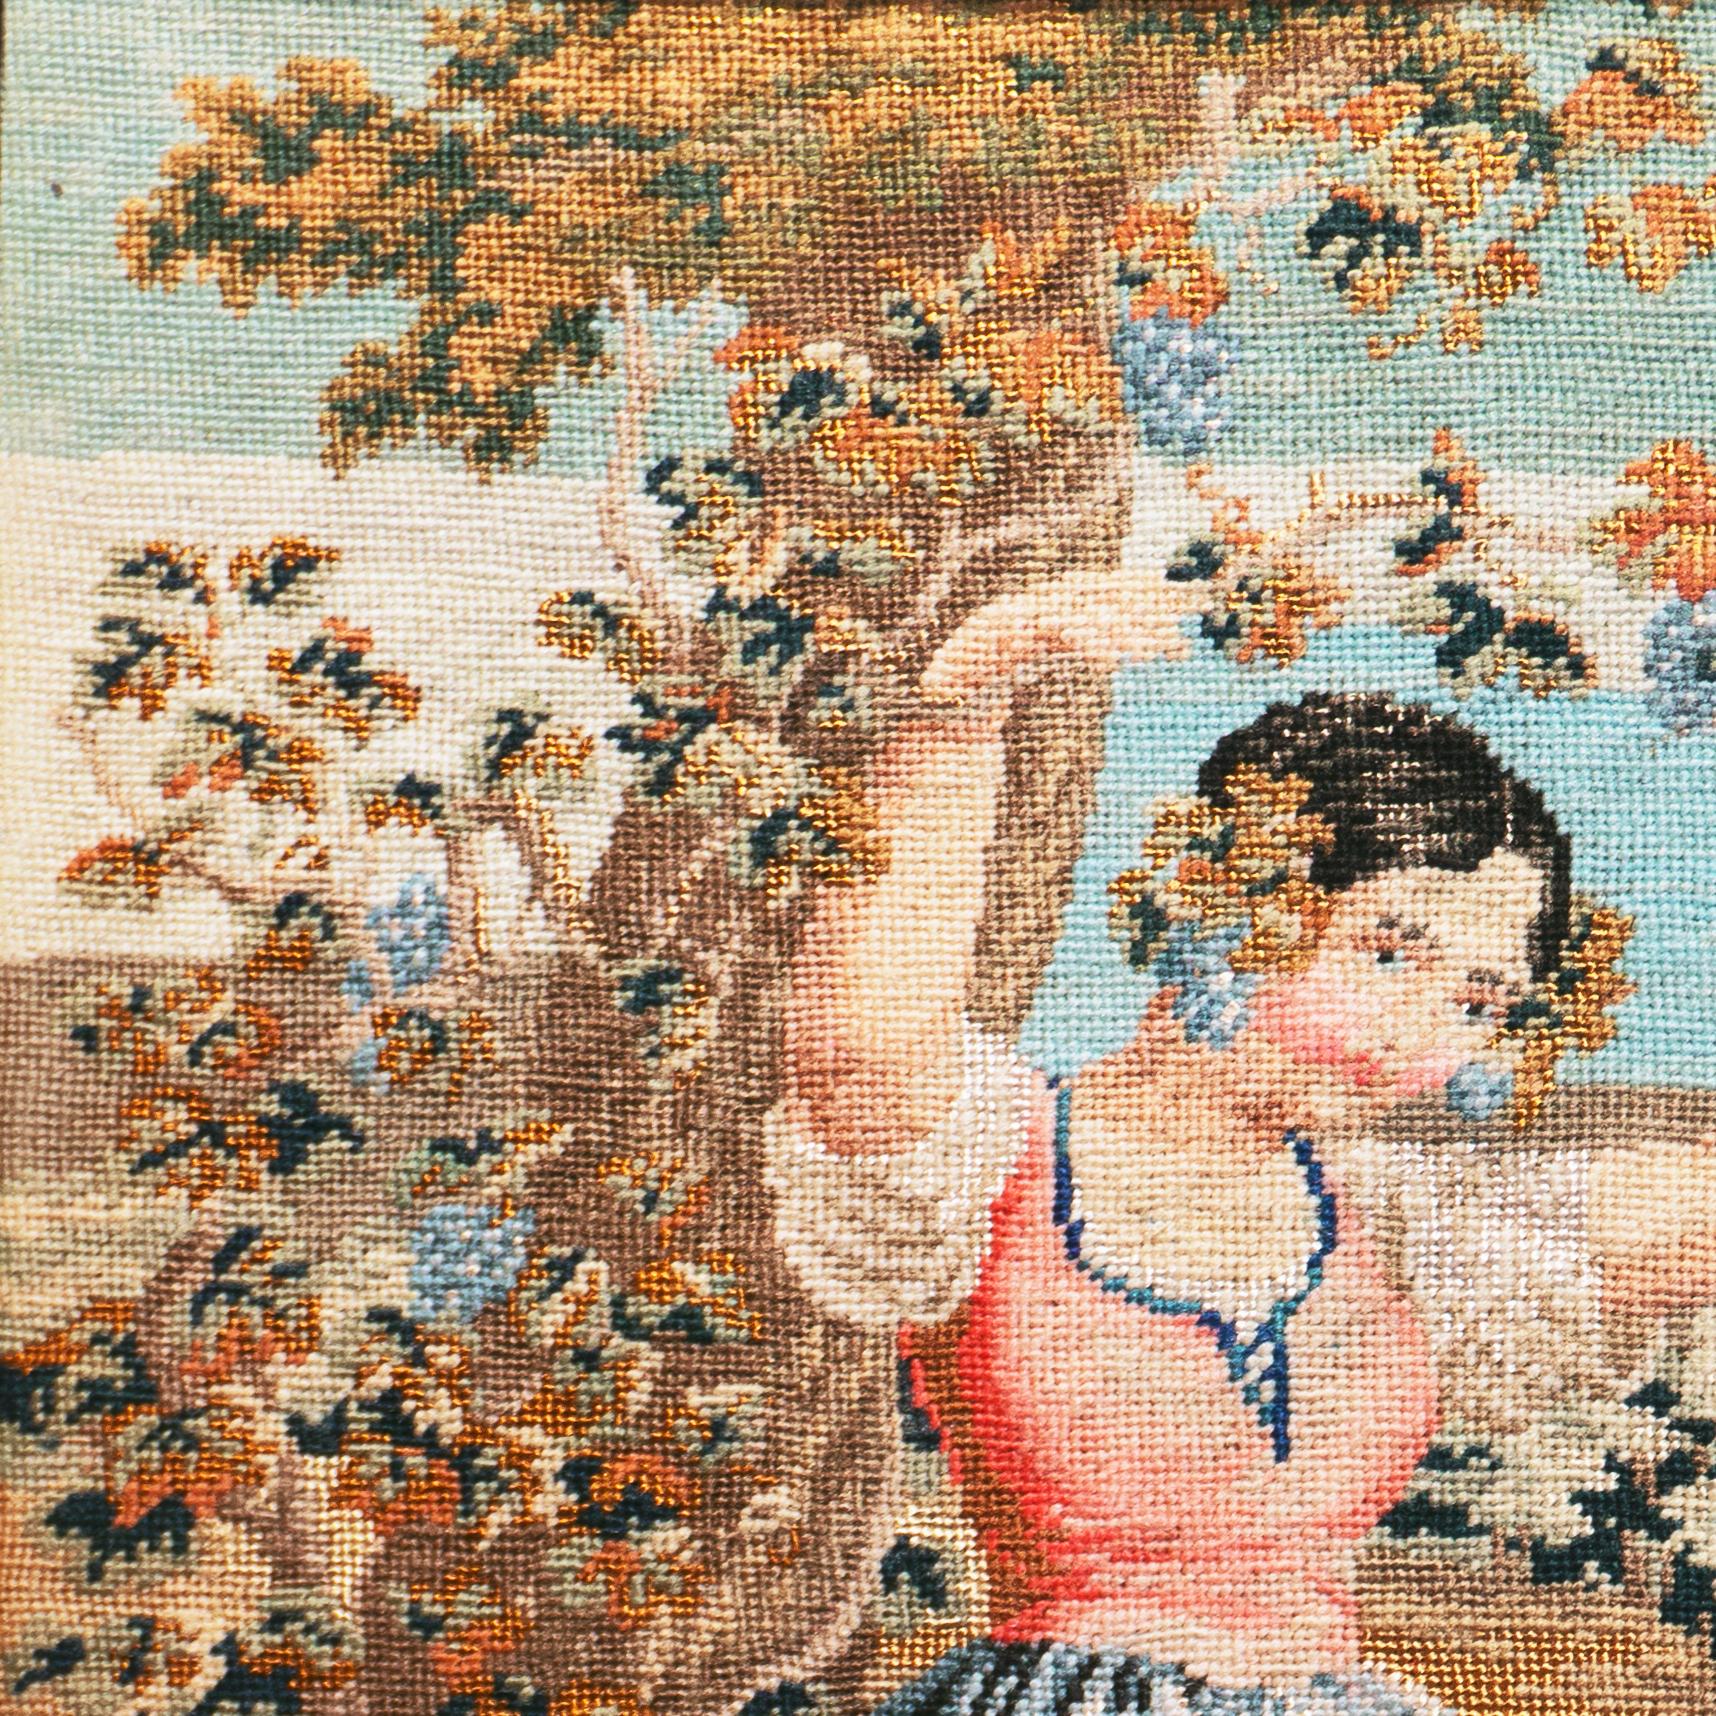 An unusually fine and delicate, mid-19th American figural needlepoint showing an idyllic view of frontier life with a young girl reaching up on tiptoes towards a grape-laden vine on a tree bough that her mother is lowering within her reach. A